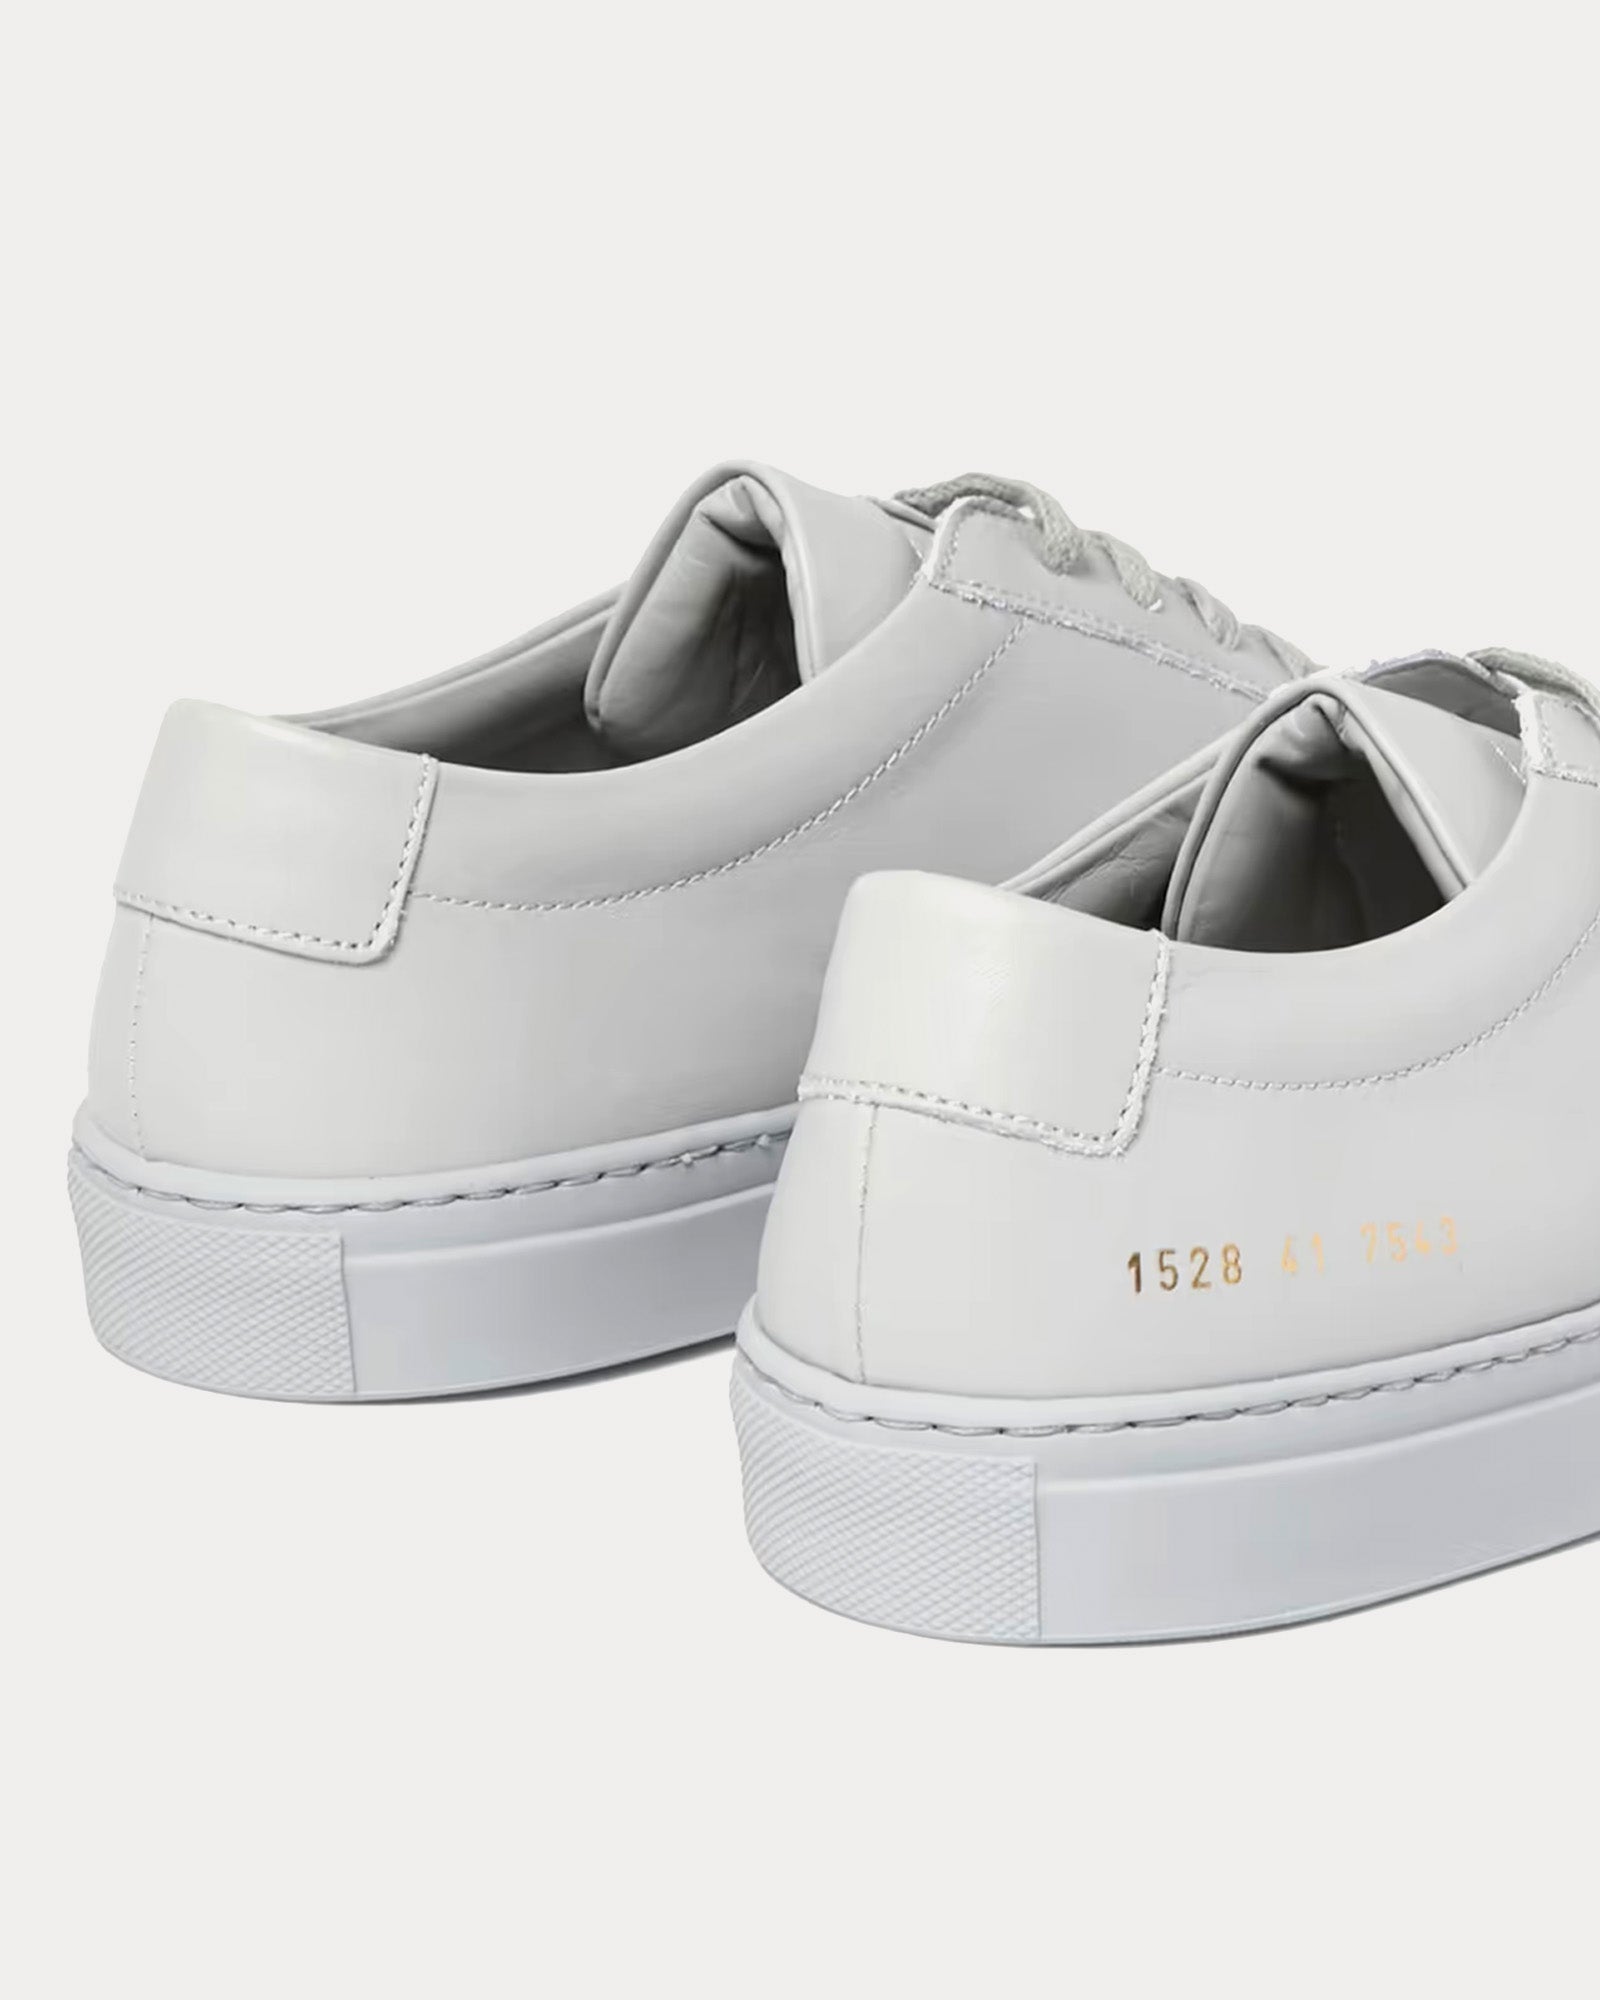 Common Projects - Original Achilles Leather Grey Low Top Sneakers